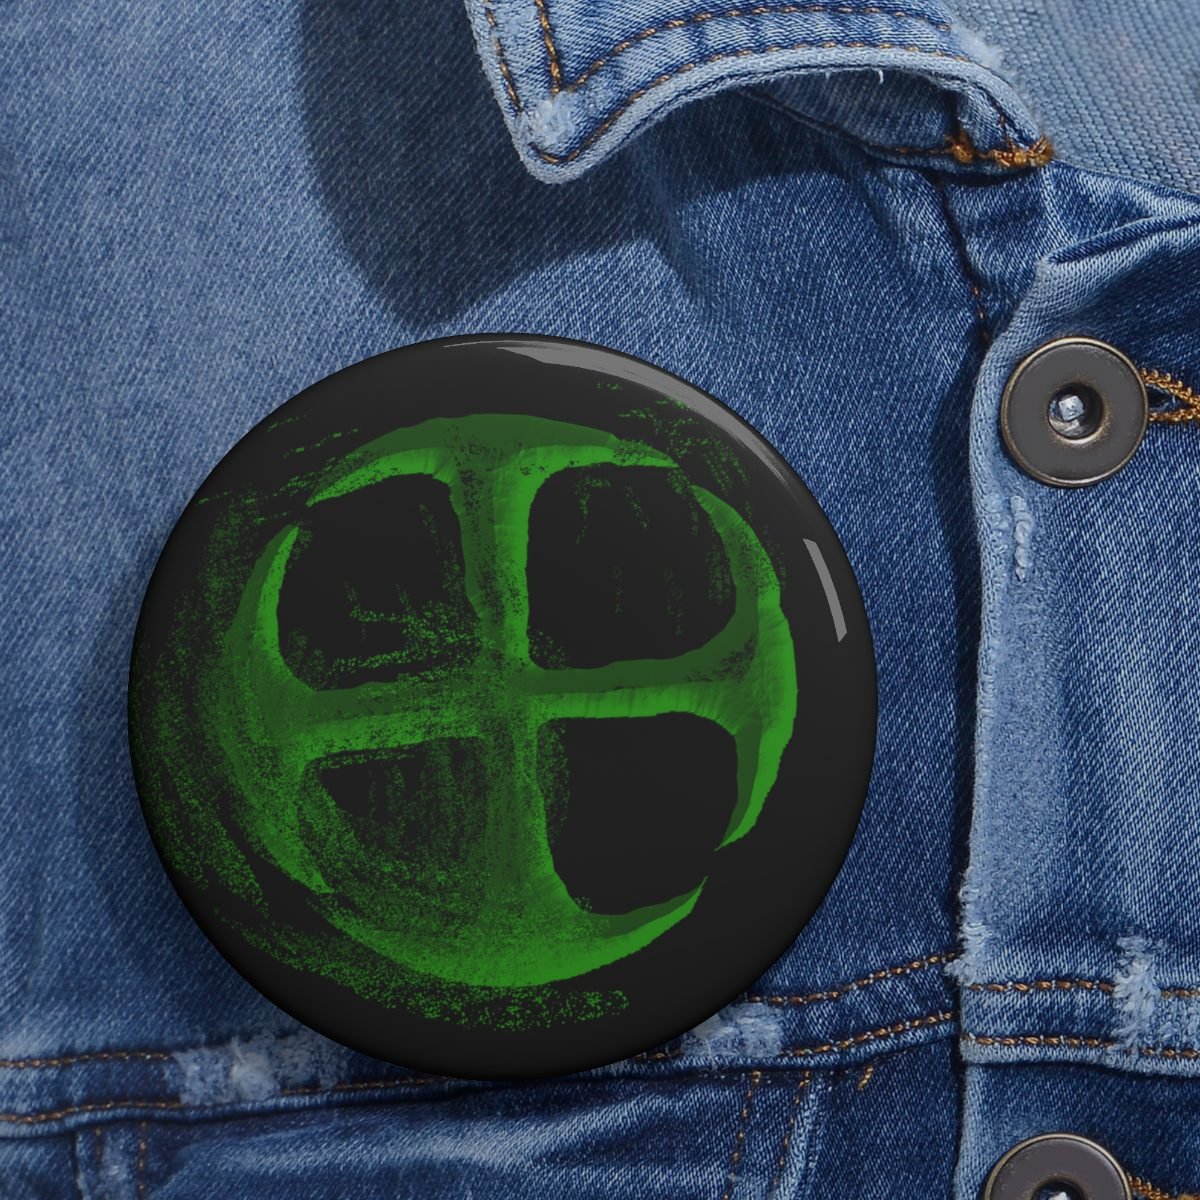 Deliverance Disintegrating Cross Green Pin Buttons